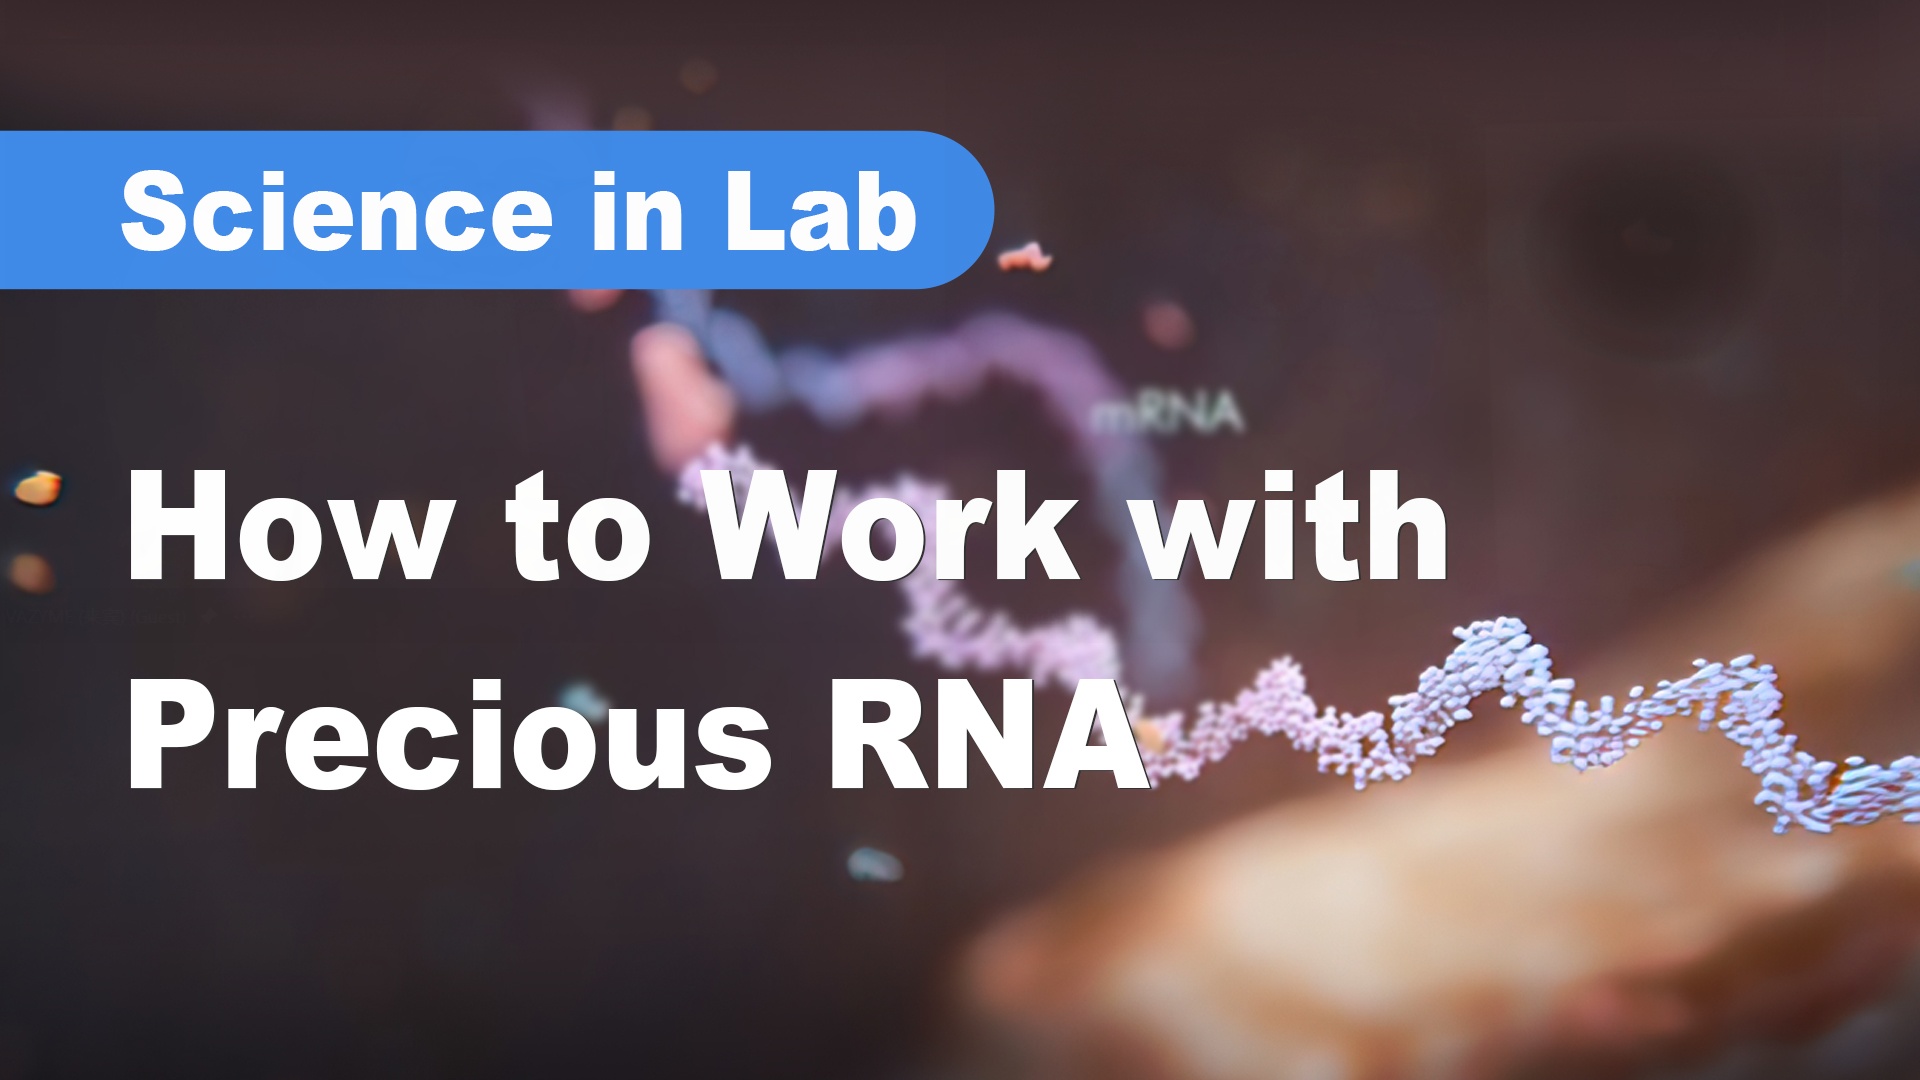 Science in Lab | How to Work with Precious RNA